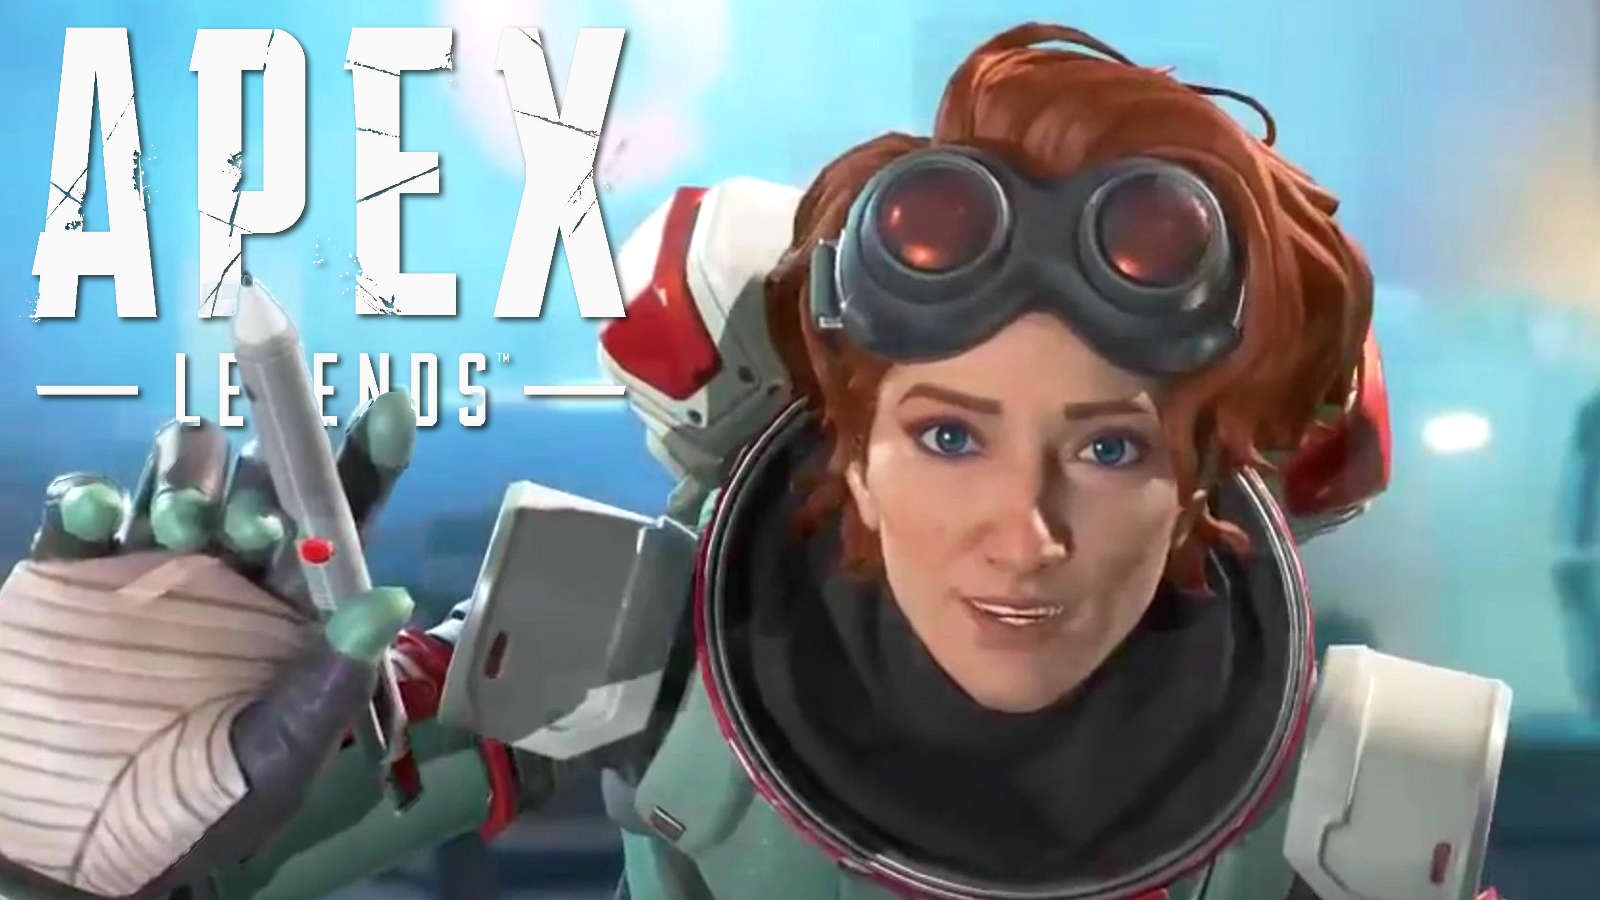 What are Horizon's abilities in Apex Legends? Season 7 character skills